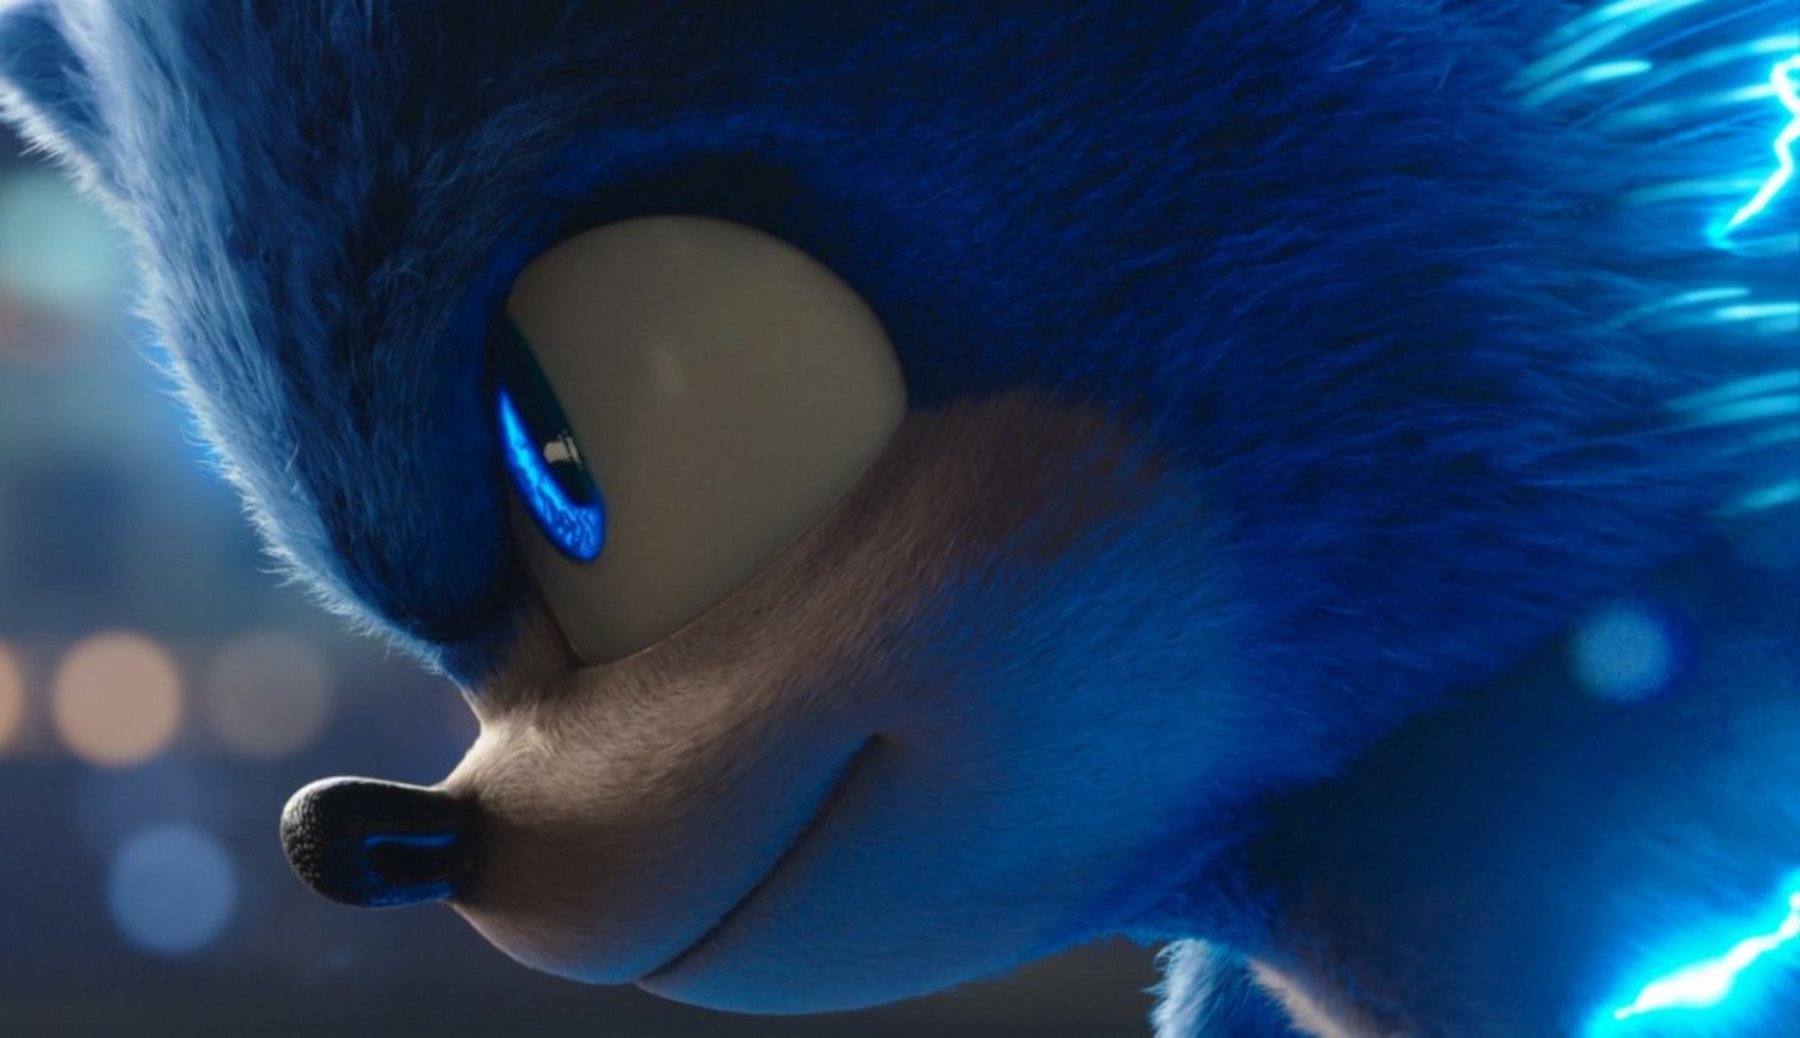 Sonic the Hedgehog 2 (2022) - Official Trailer - Paramount Pictures 